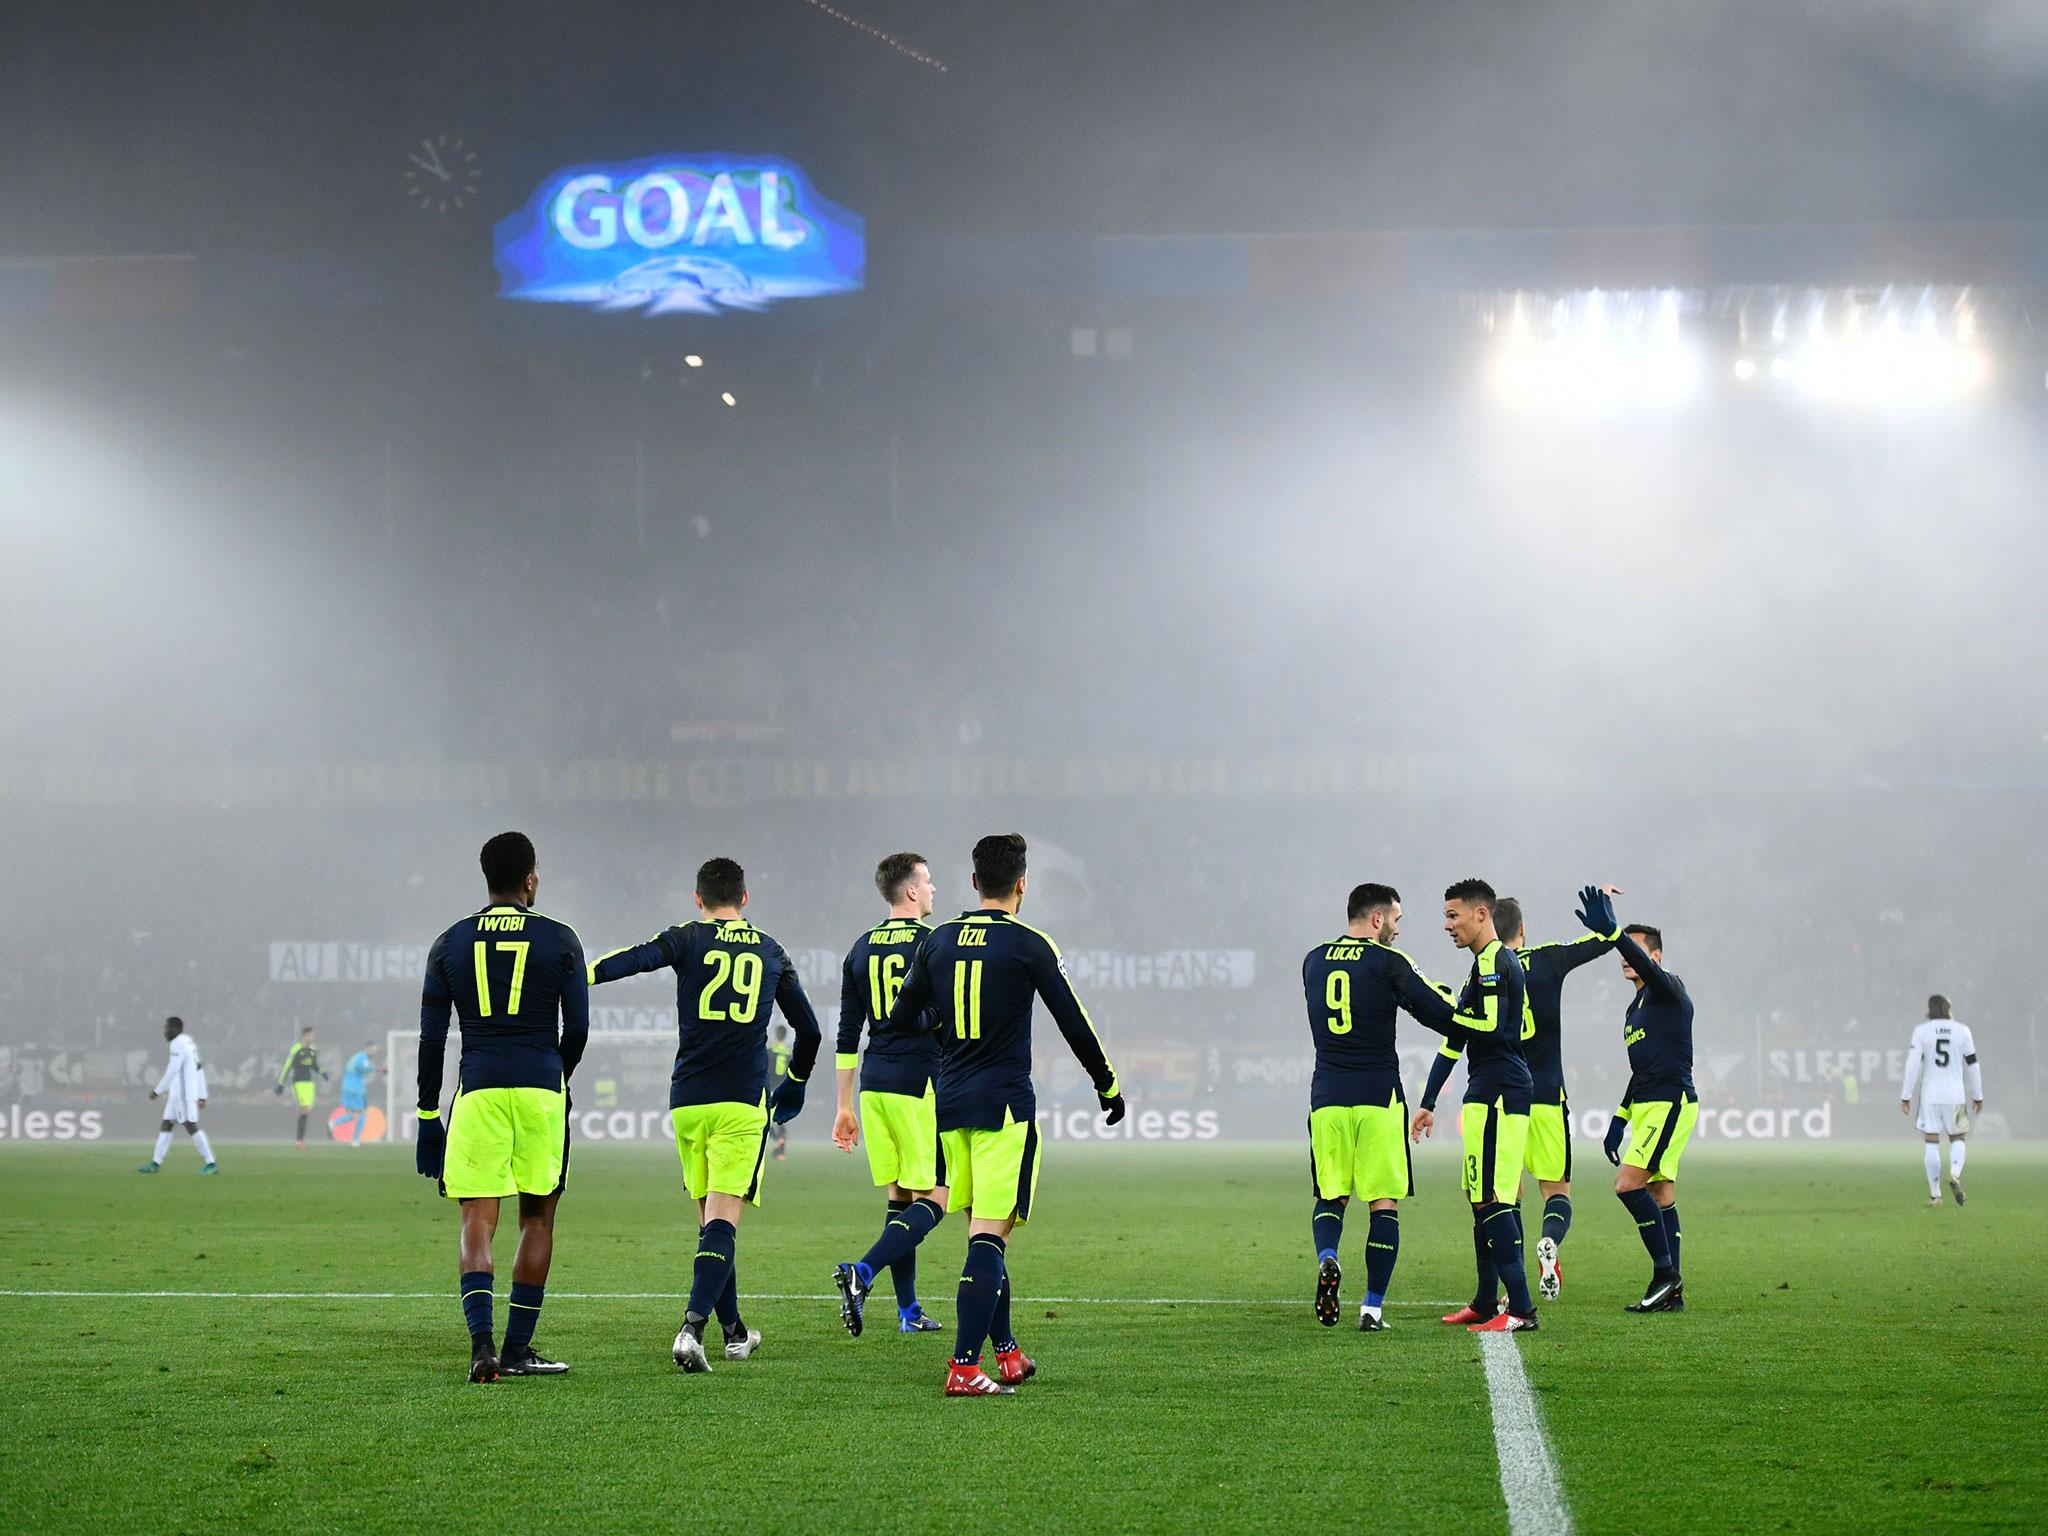 Arsenal won their Champions League group for the first time in five seasons